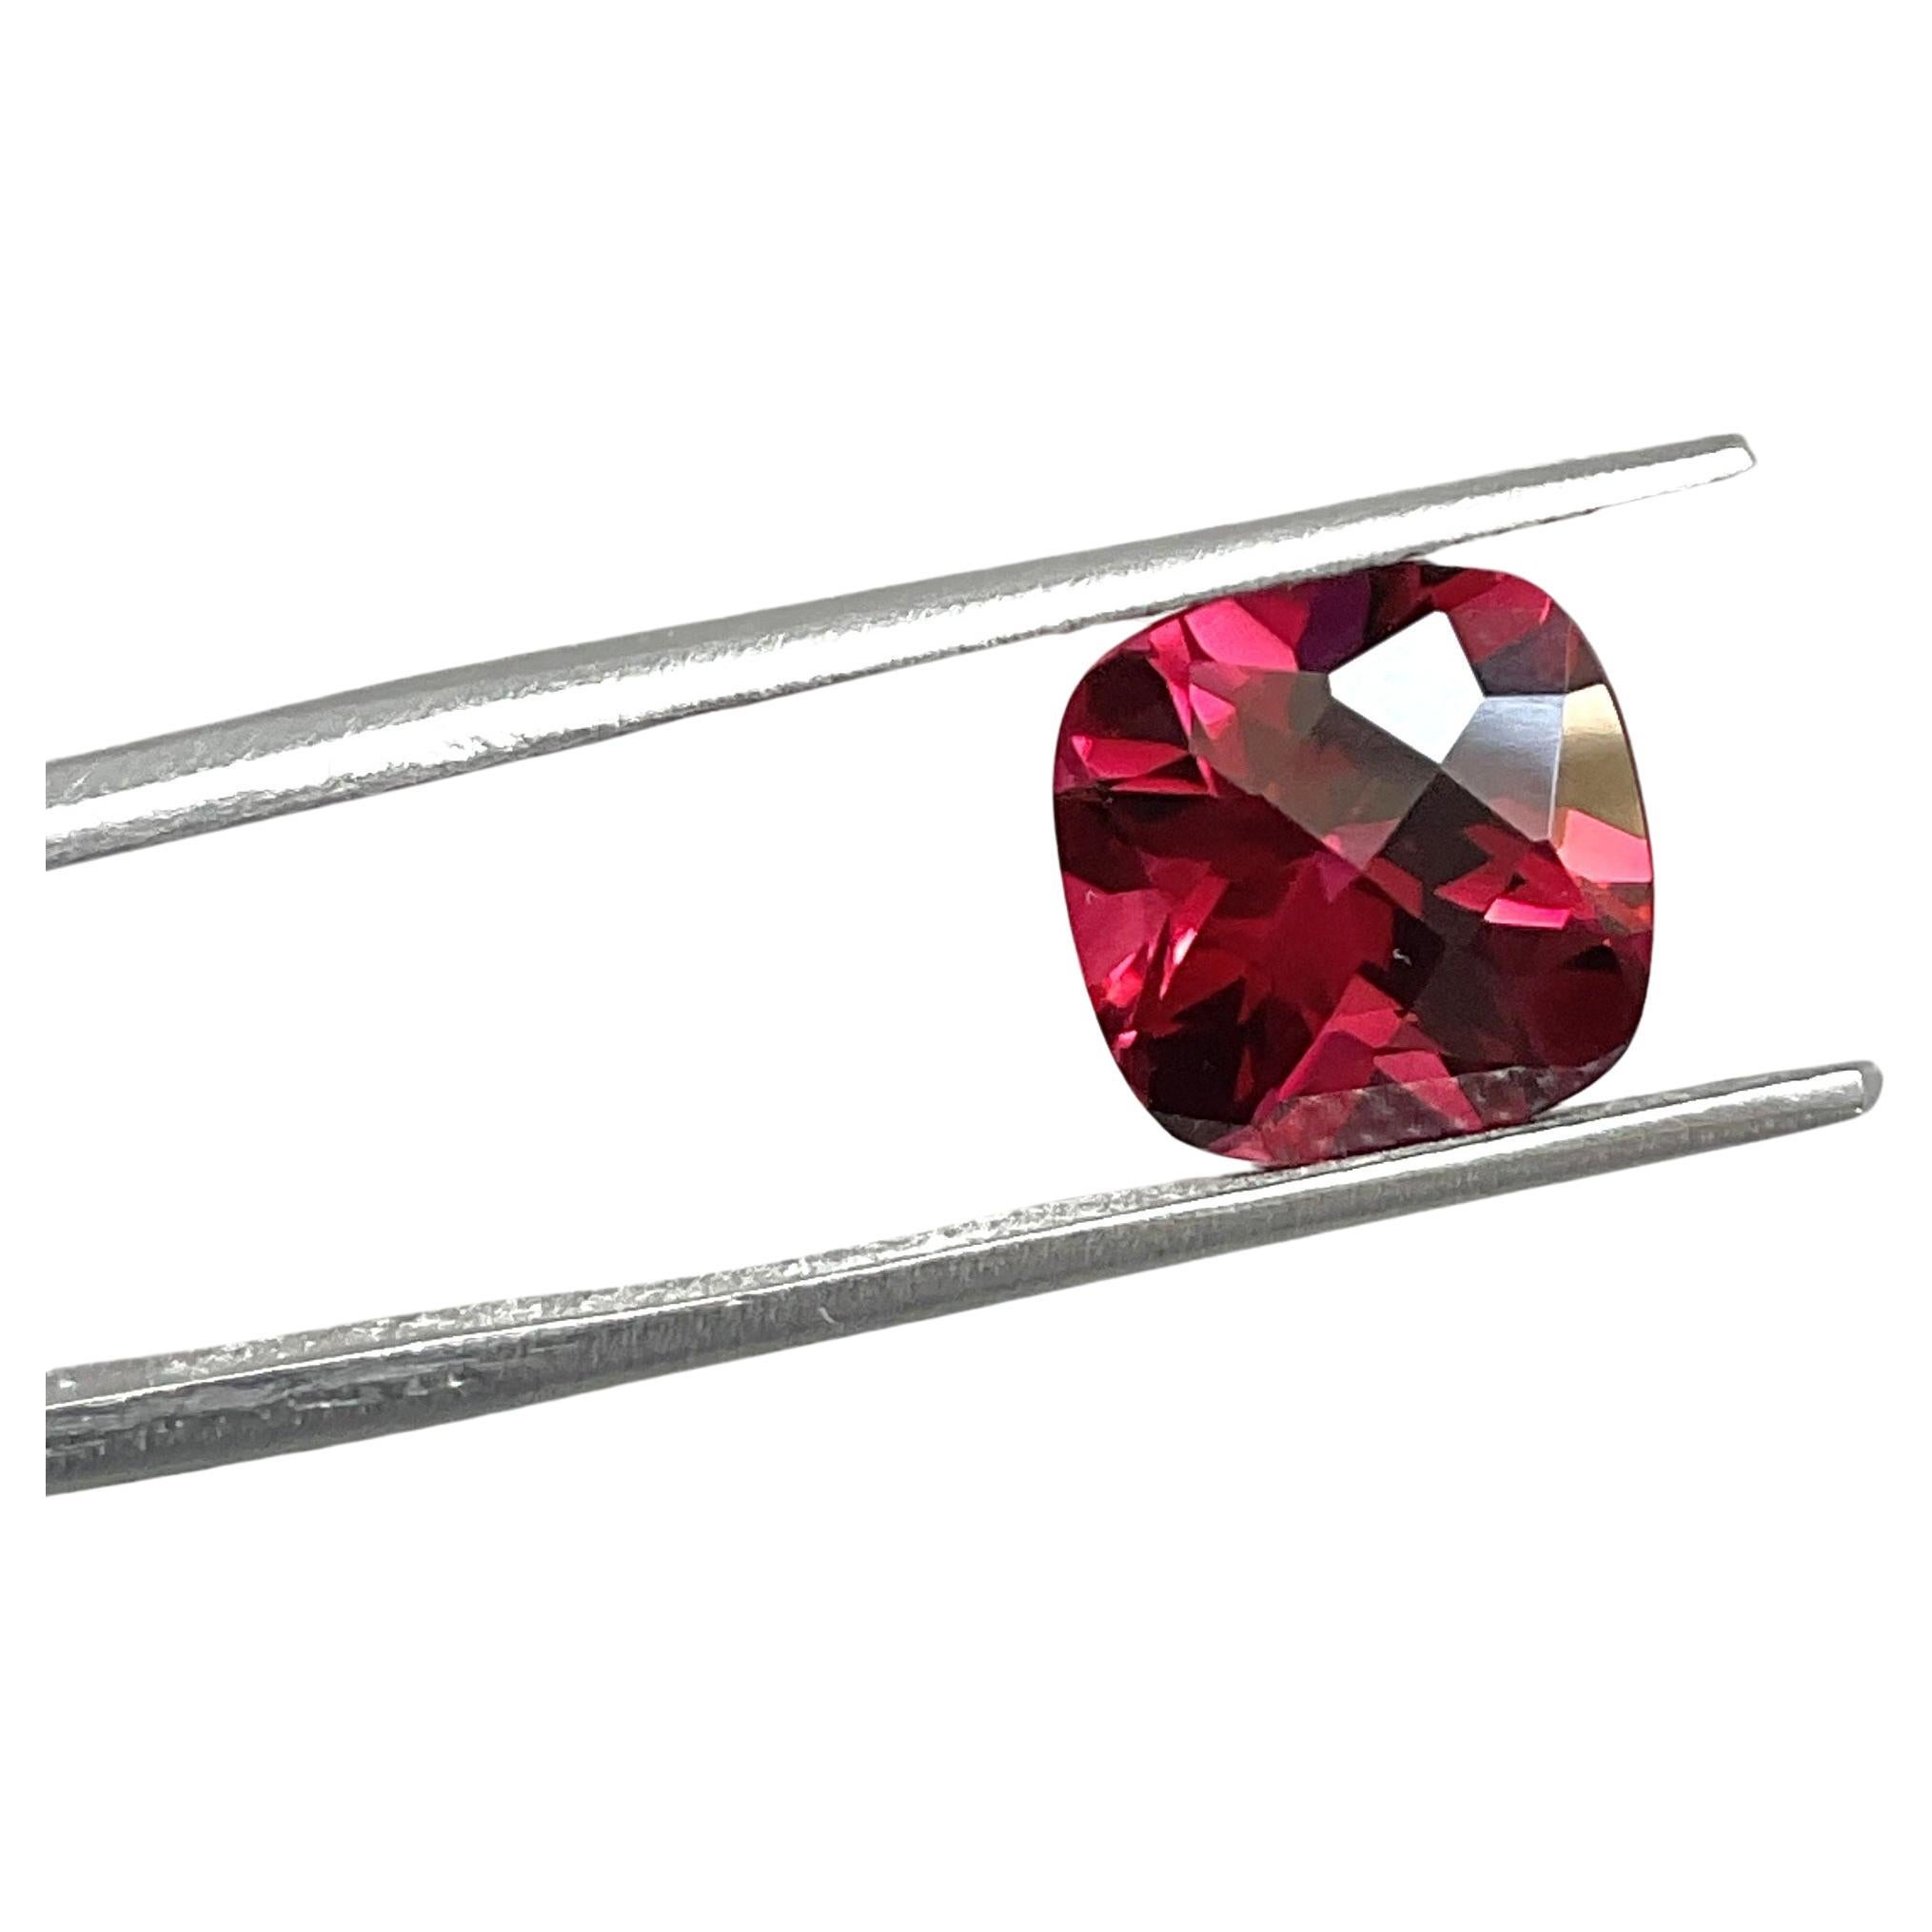 4.15 carats natural rubellite tourmaline top quality cut stone for fine jewelry

Gemstone - Rubellite Tourmaline
Weight -  4.15  Ct
Size - 10 MM
Color - Reddish Pink
Piece - 1
Shape - Cushion
